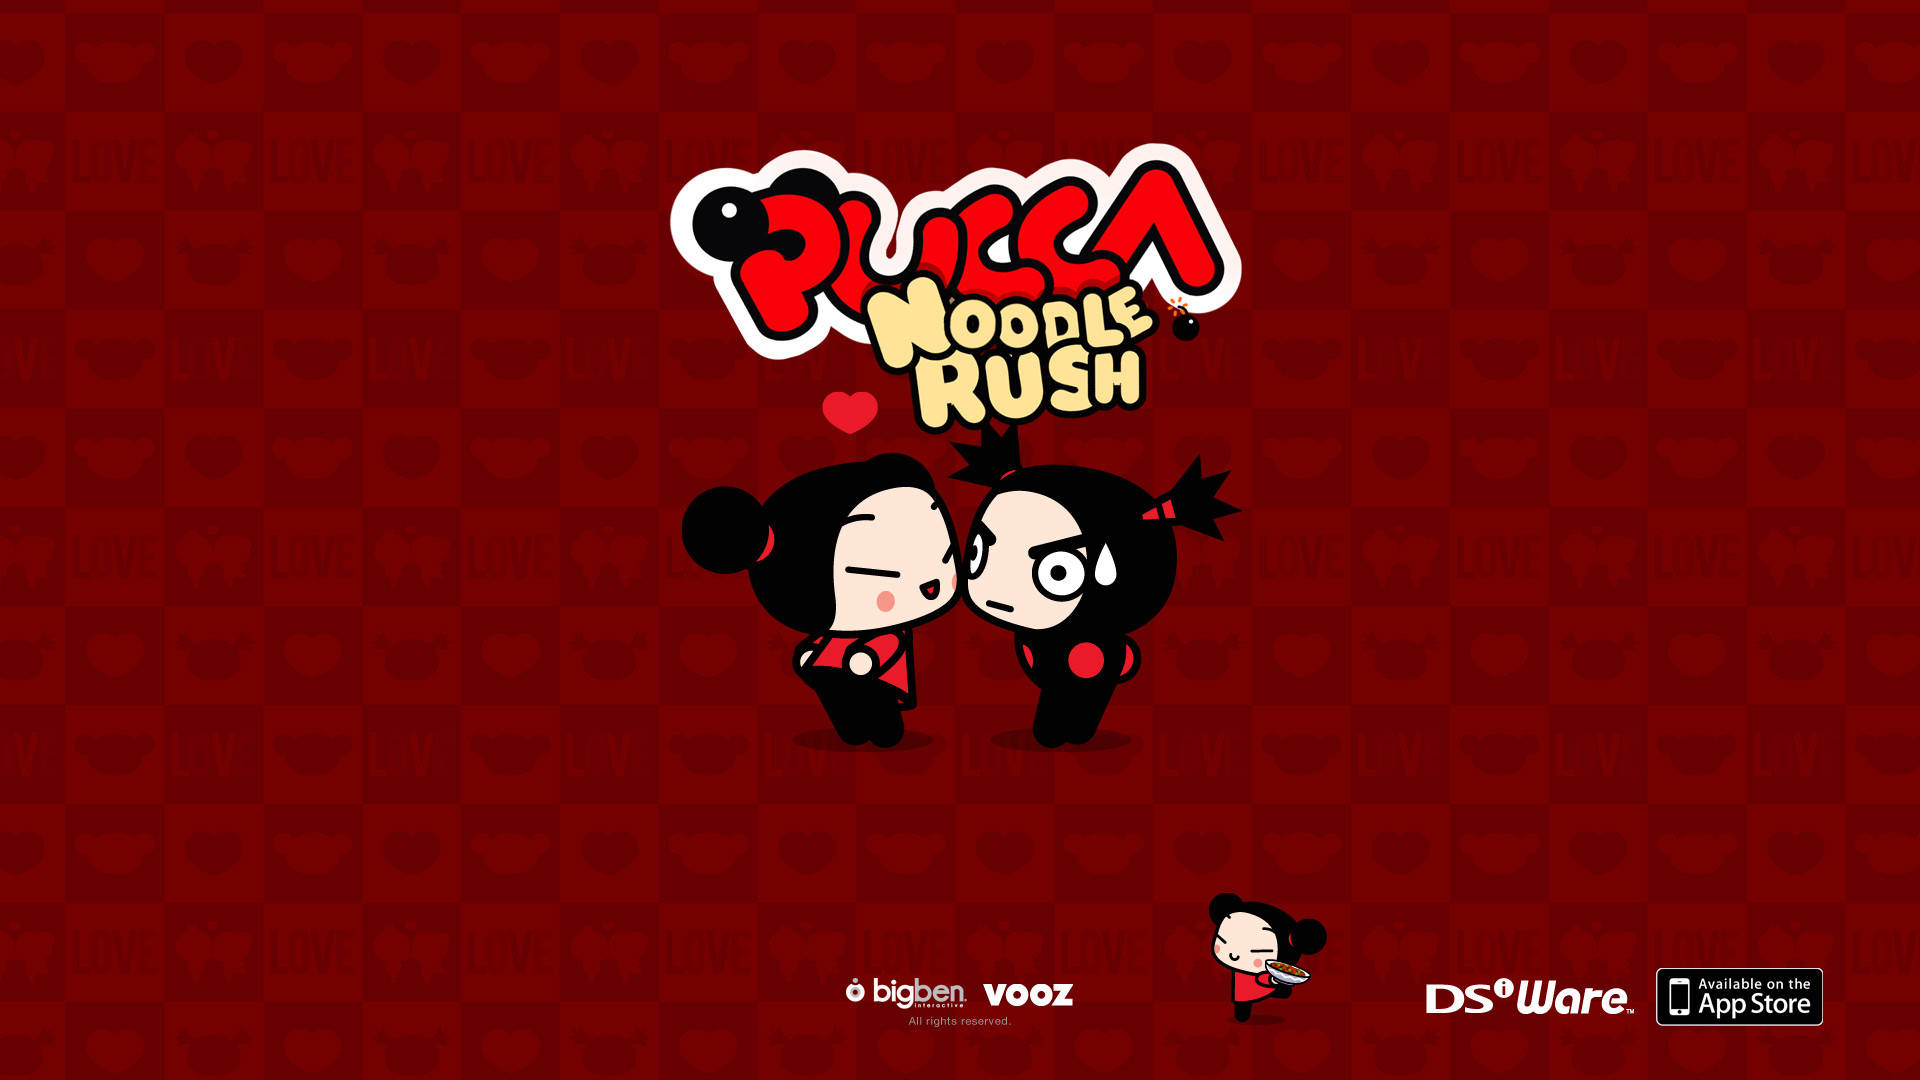 Pucca Noodle Rush Promotional Poster Wallpaper